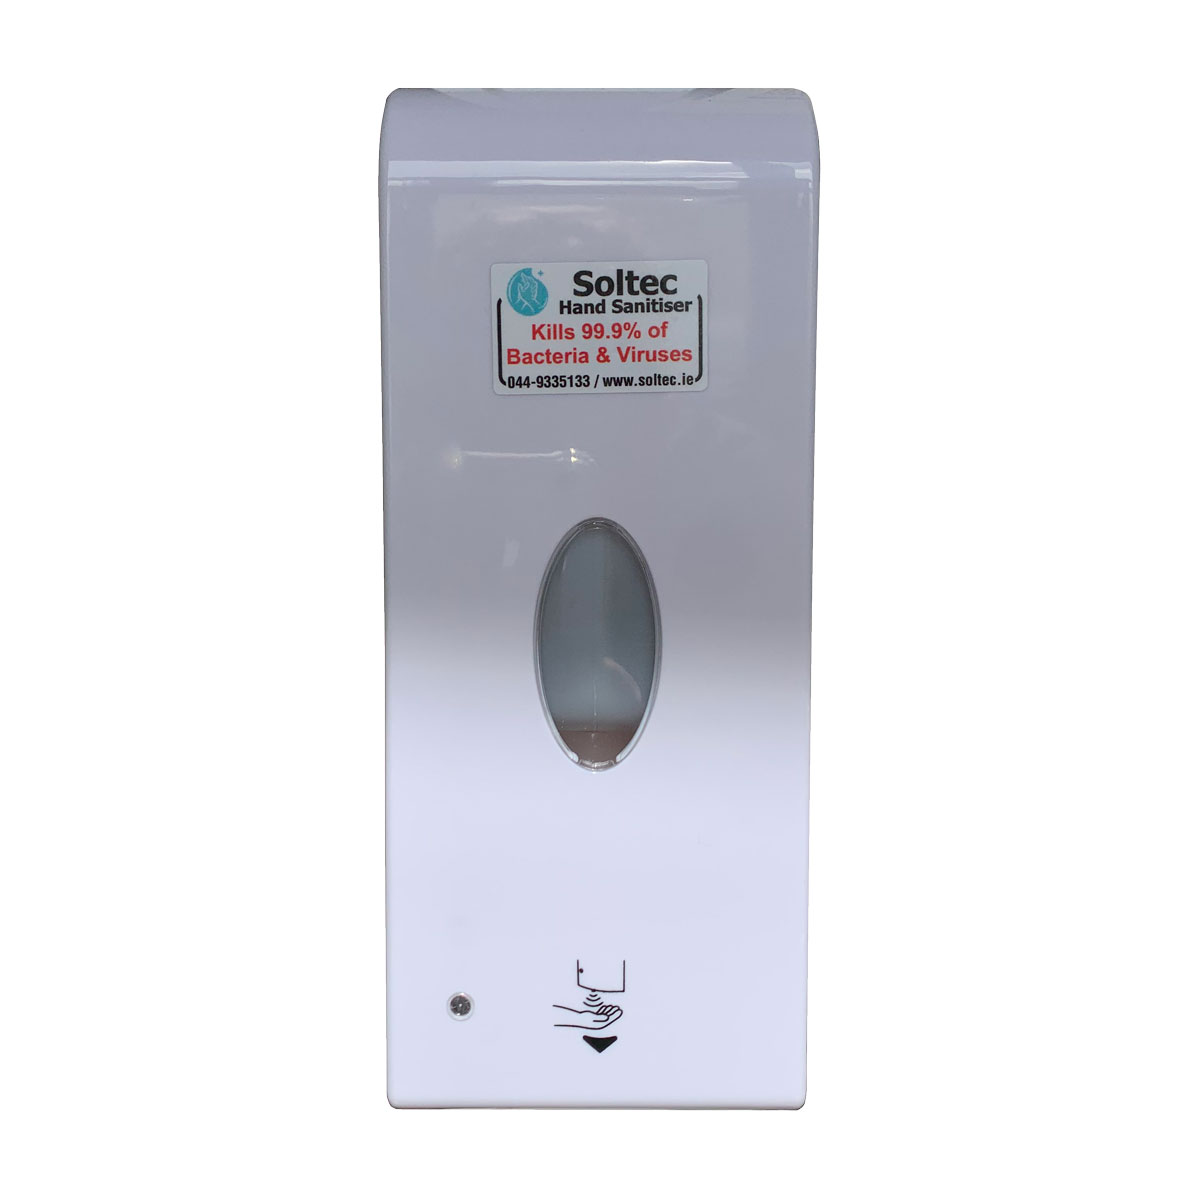 Image of a bottle of high alcohol hand sanitiser available to buy from Soltec.ie